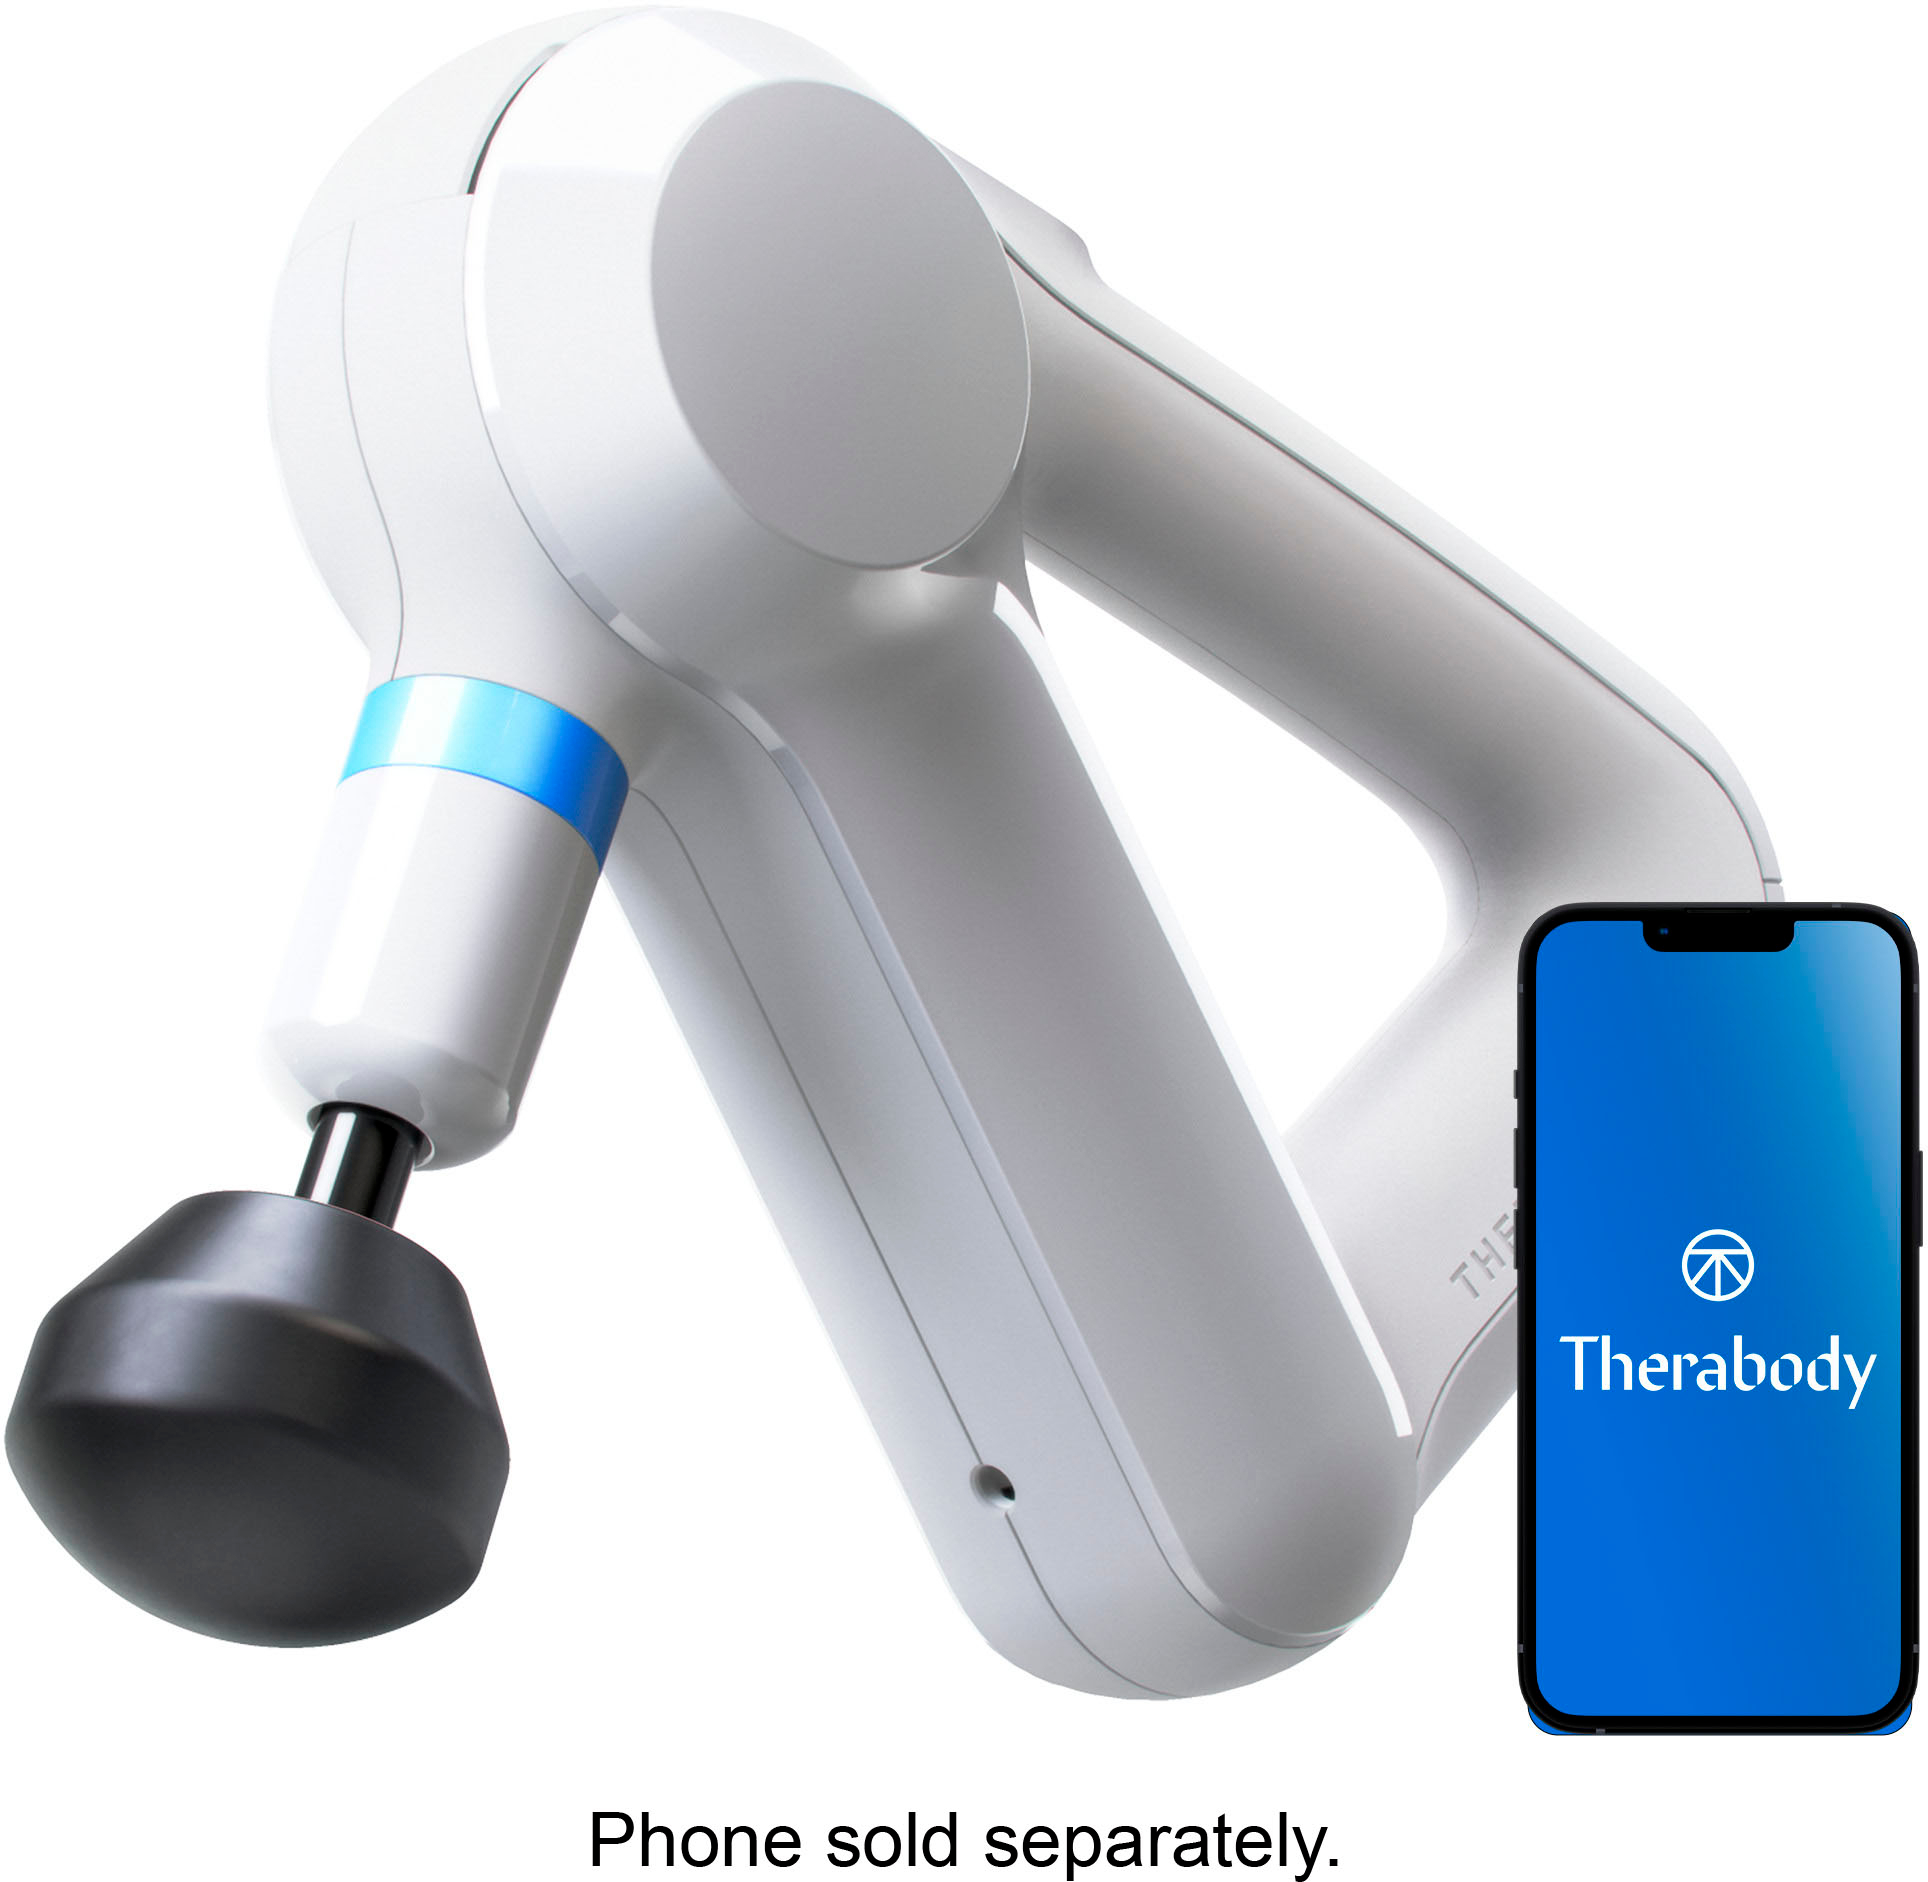 Angle View: Therabody - Theragun Elite Bluetooth + App Enabled Massage Gun + 5 Attachments, 40lbs Force (Latest Model) - White